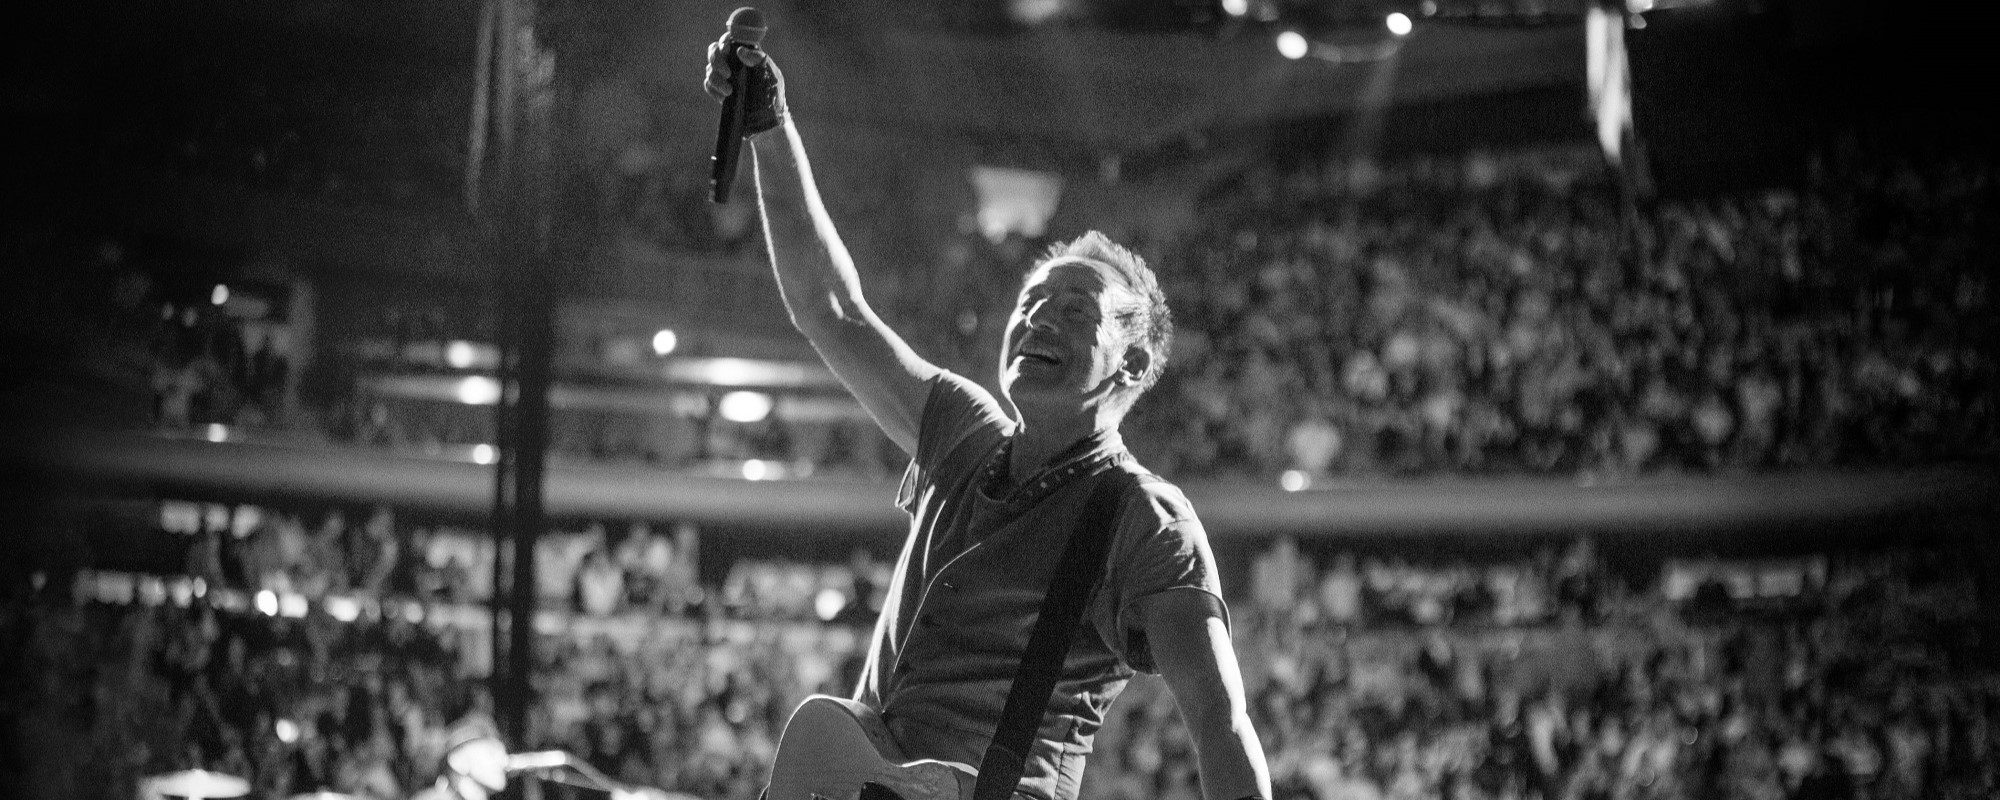 Bruce Springsteen Marks Anniversary of First Top 10 Hit, “Hungry Heart”